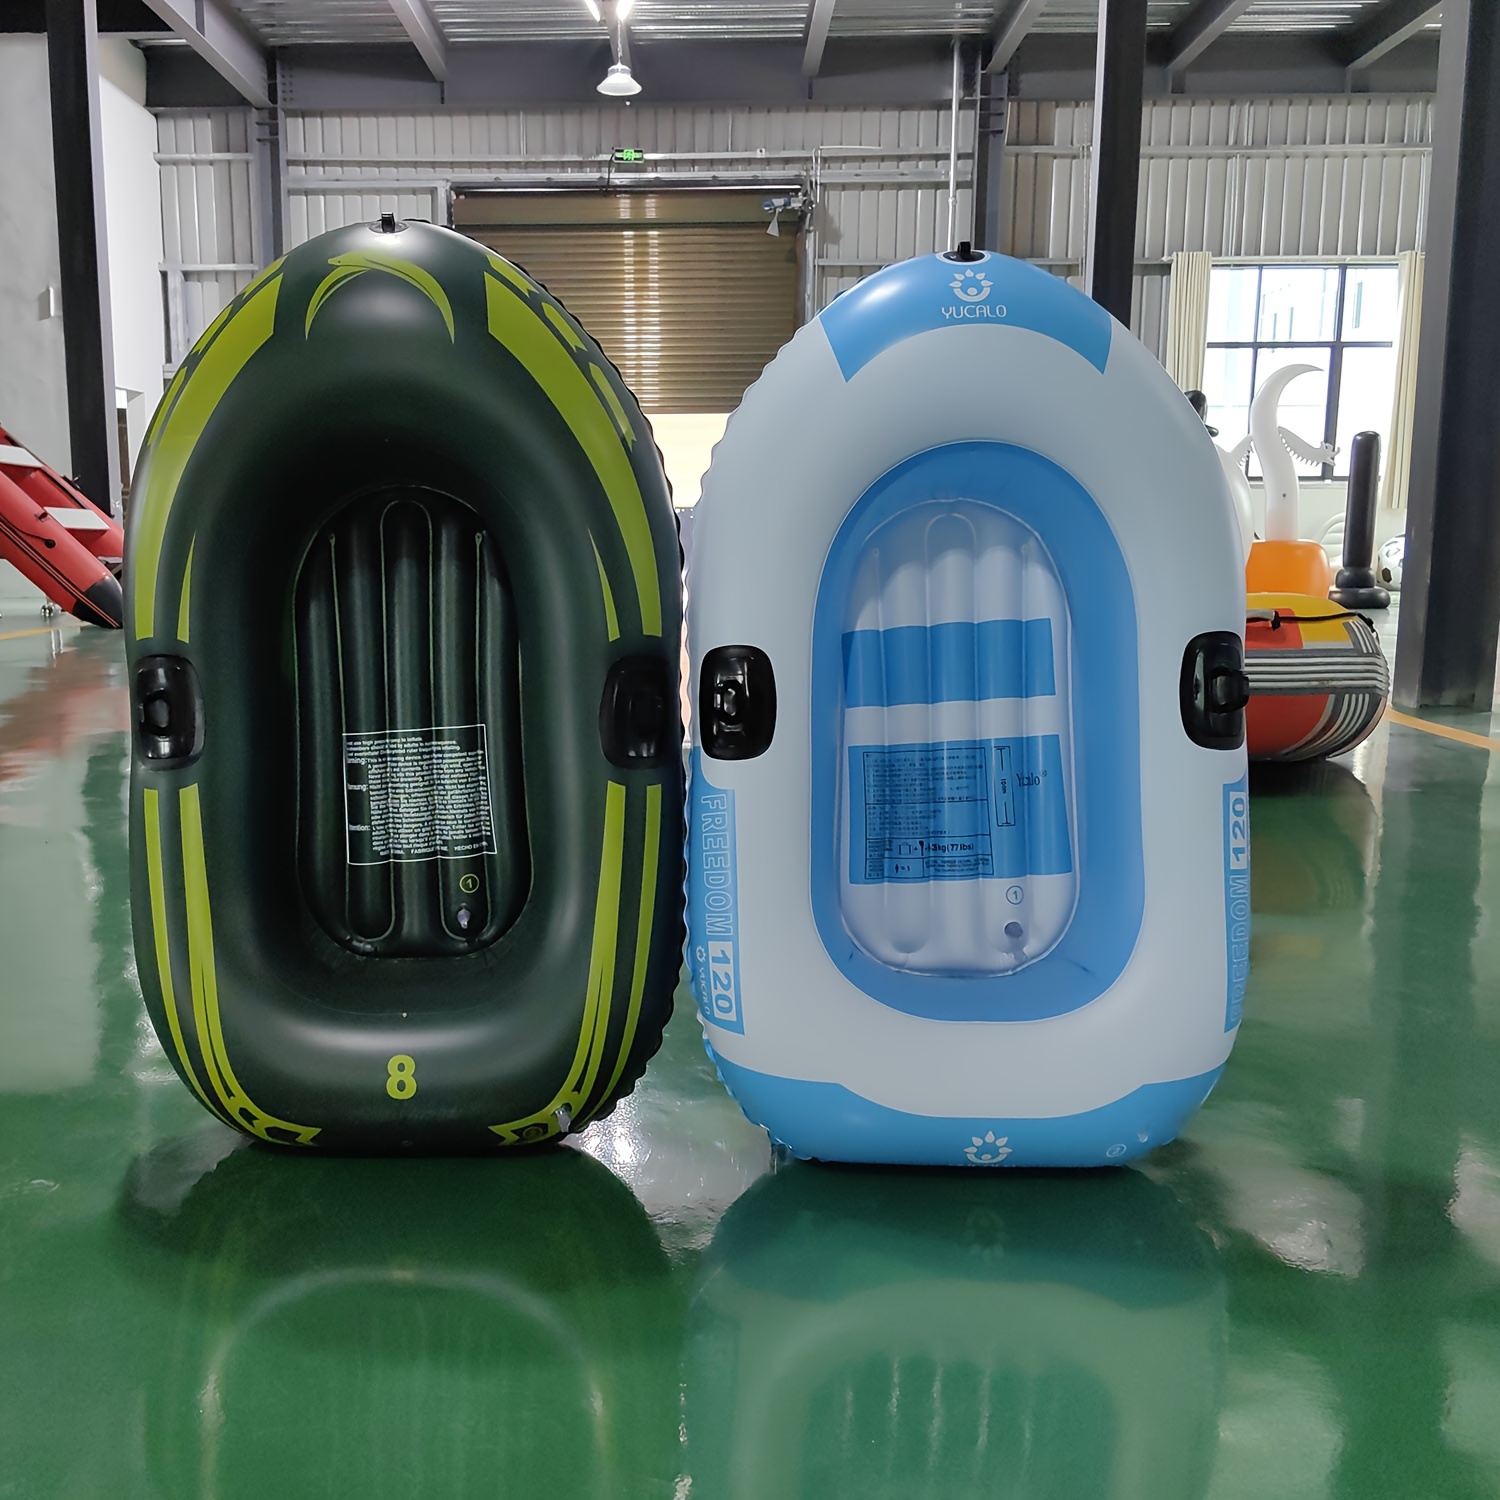 1-3 People Inflatable Boat Canoe Inflatable Kayak with Air, Pump Ropeon  Boat for Adults and Kids, Portable Fishing Boat